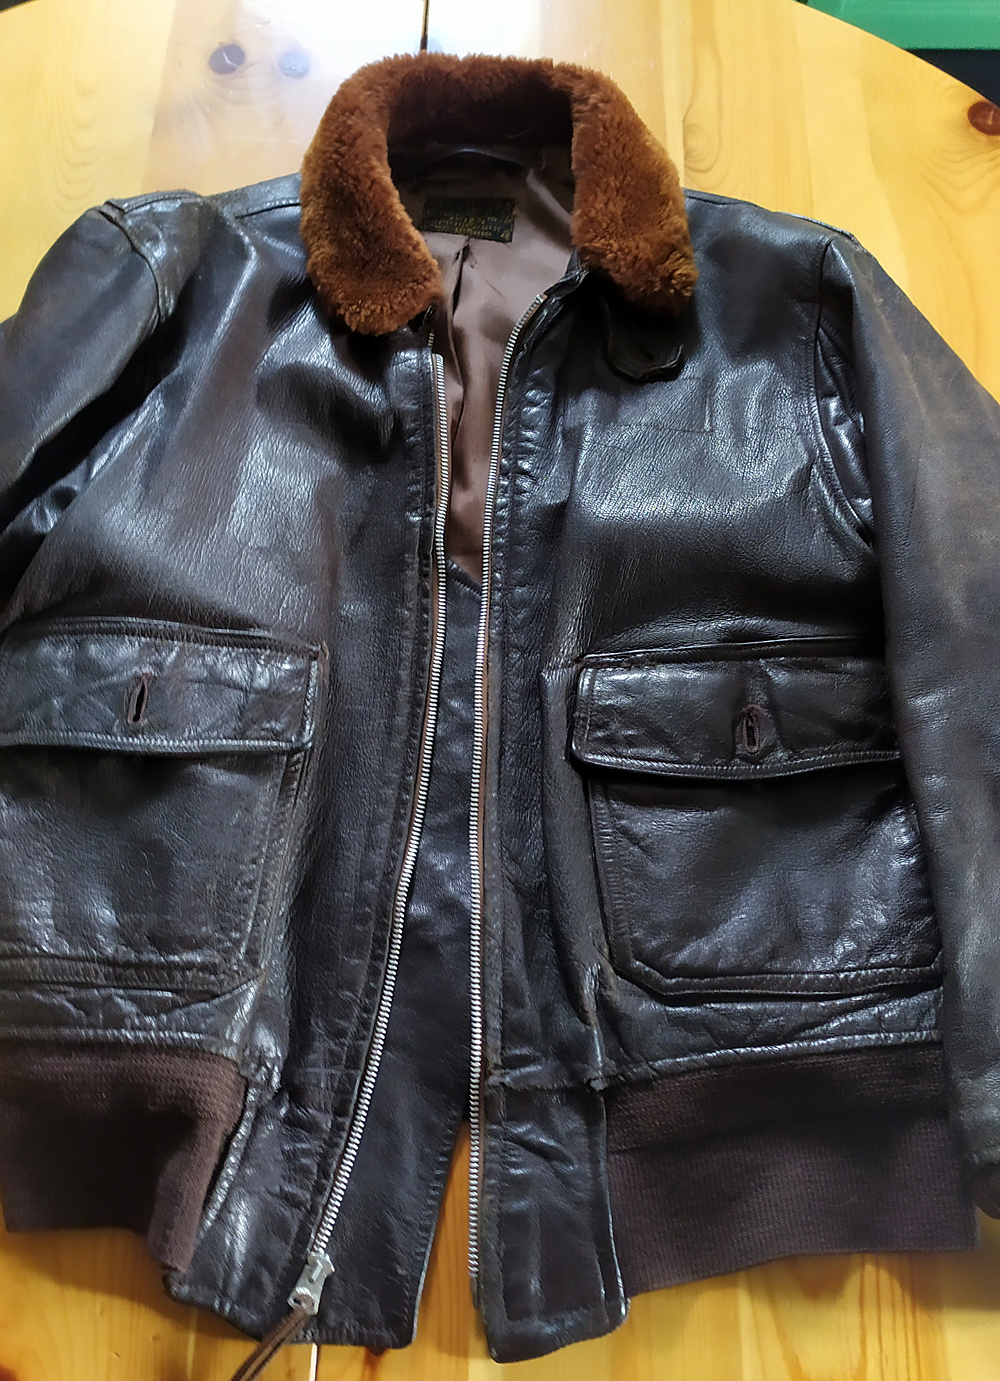 G1 Foster amend#2 1955 patch | Vintage Leather Jackets Forum